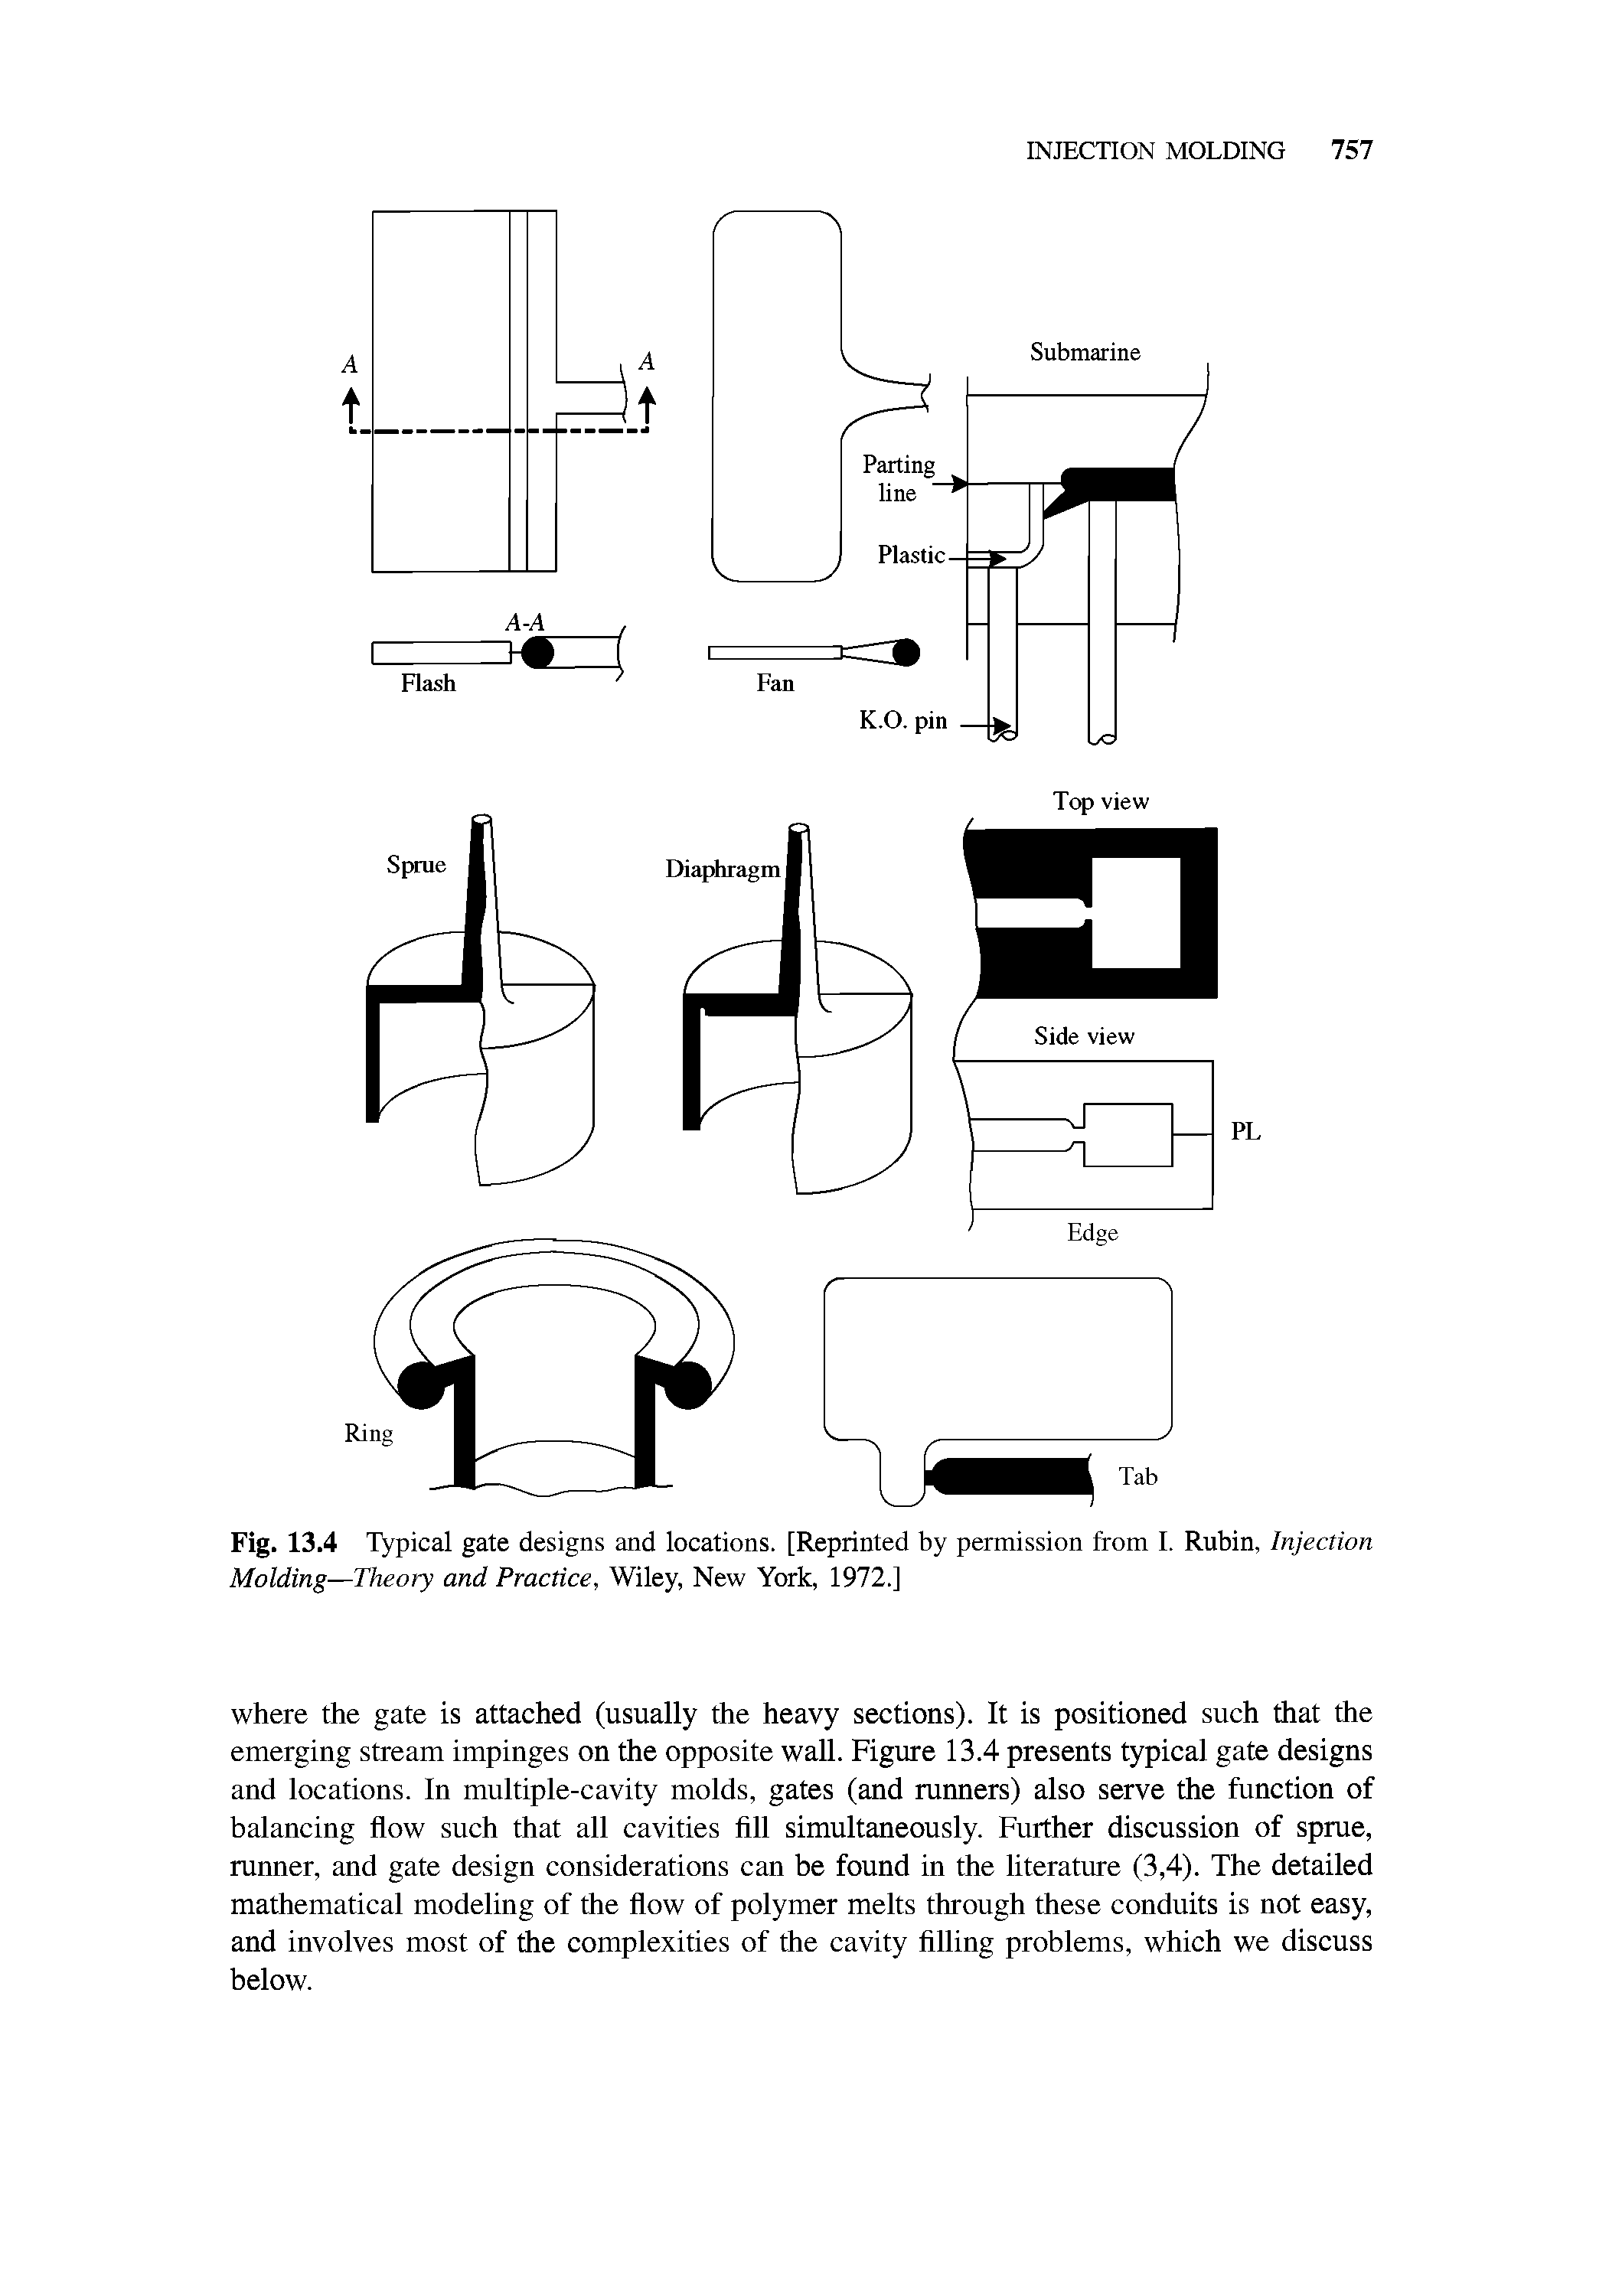 Fig. 13.4 Typical gate designs and locations. [Reprinted by permission from I. Rubin, Injection Molding—Theory and Practice, Wiley, New York, 1972.]...